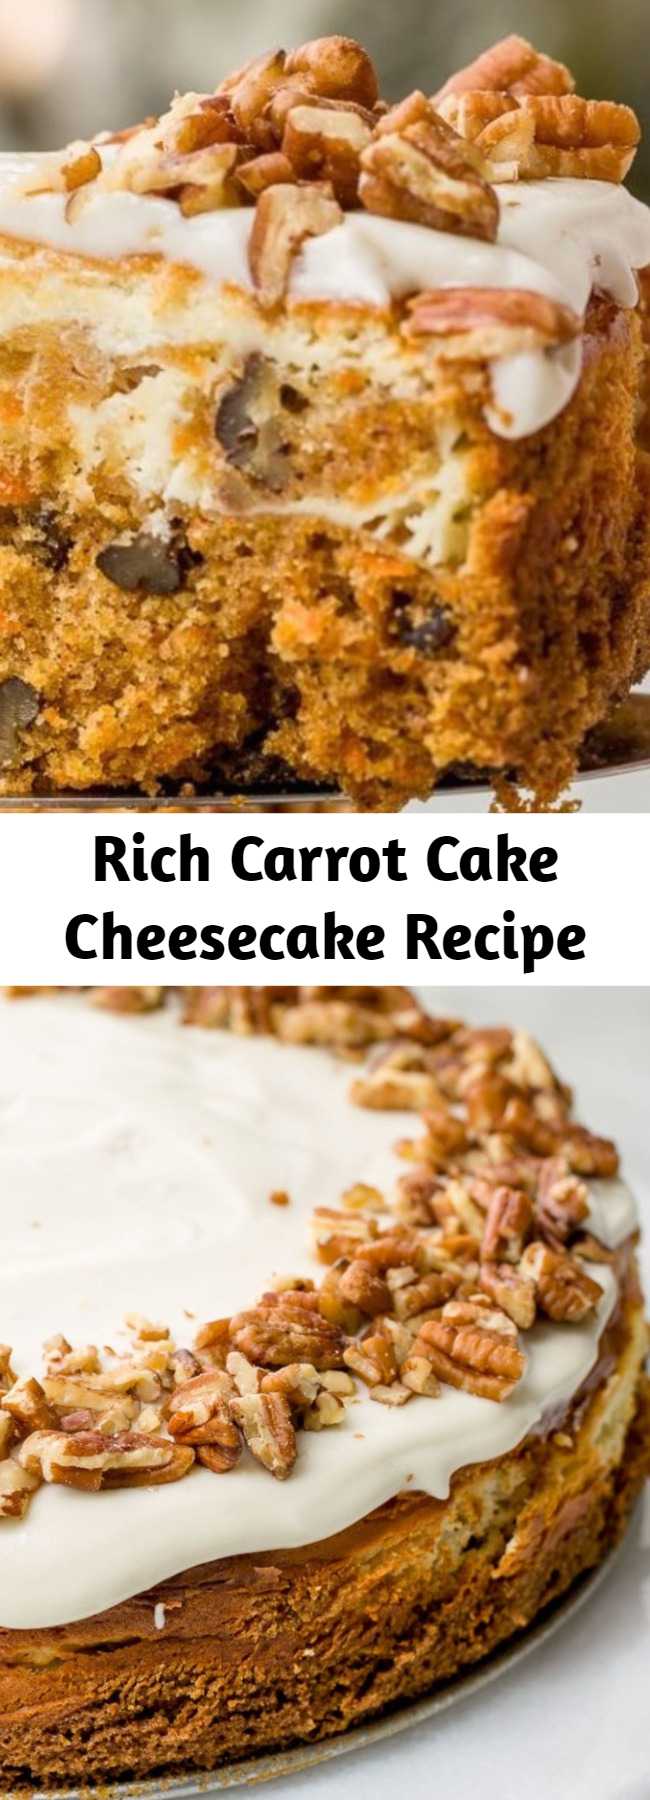 Rich Carrot Cake Cheesecake Recipe - Mash-ups don't get much better than this. With classic carrot cake on the bottom and rich, creamy cheesecake on top, we can't think of a better Easter dessert.